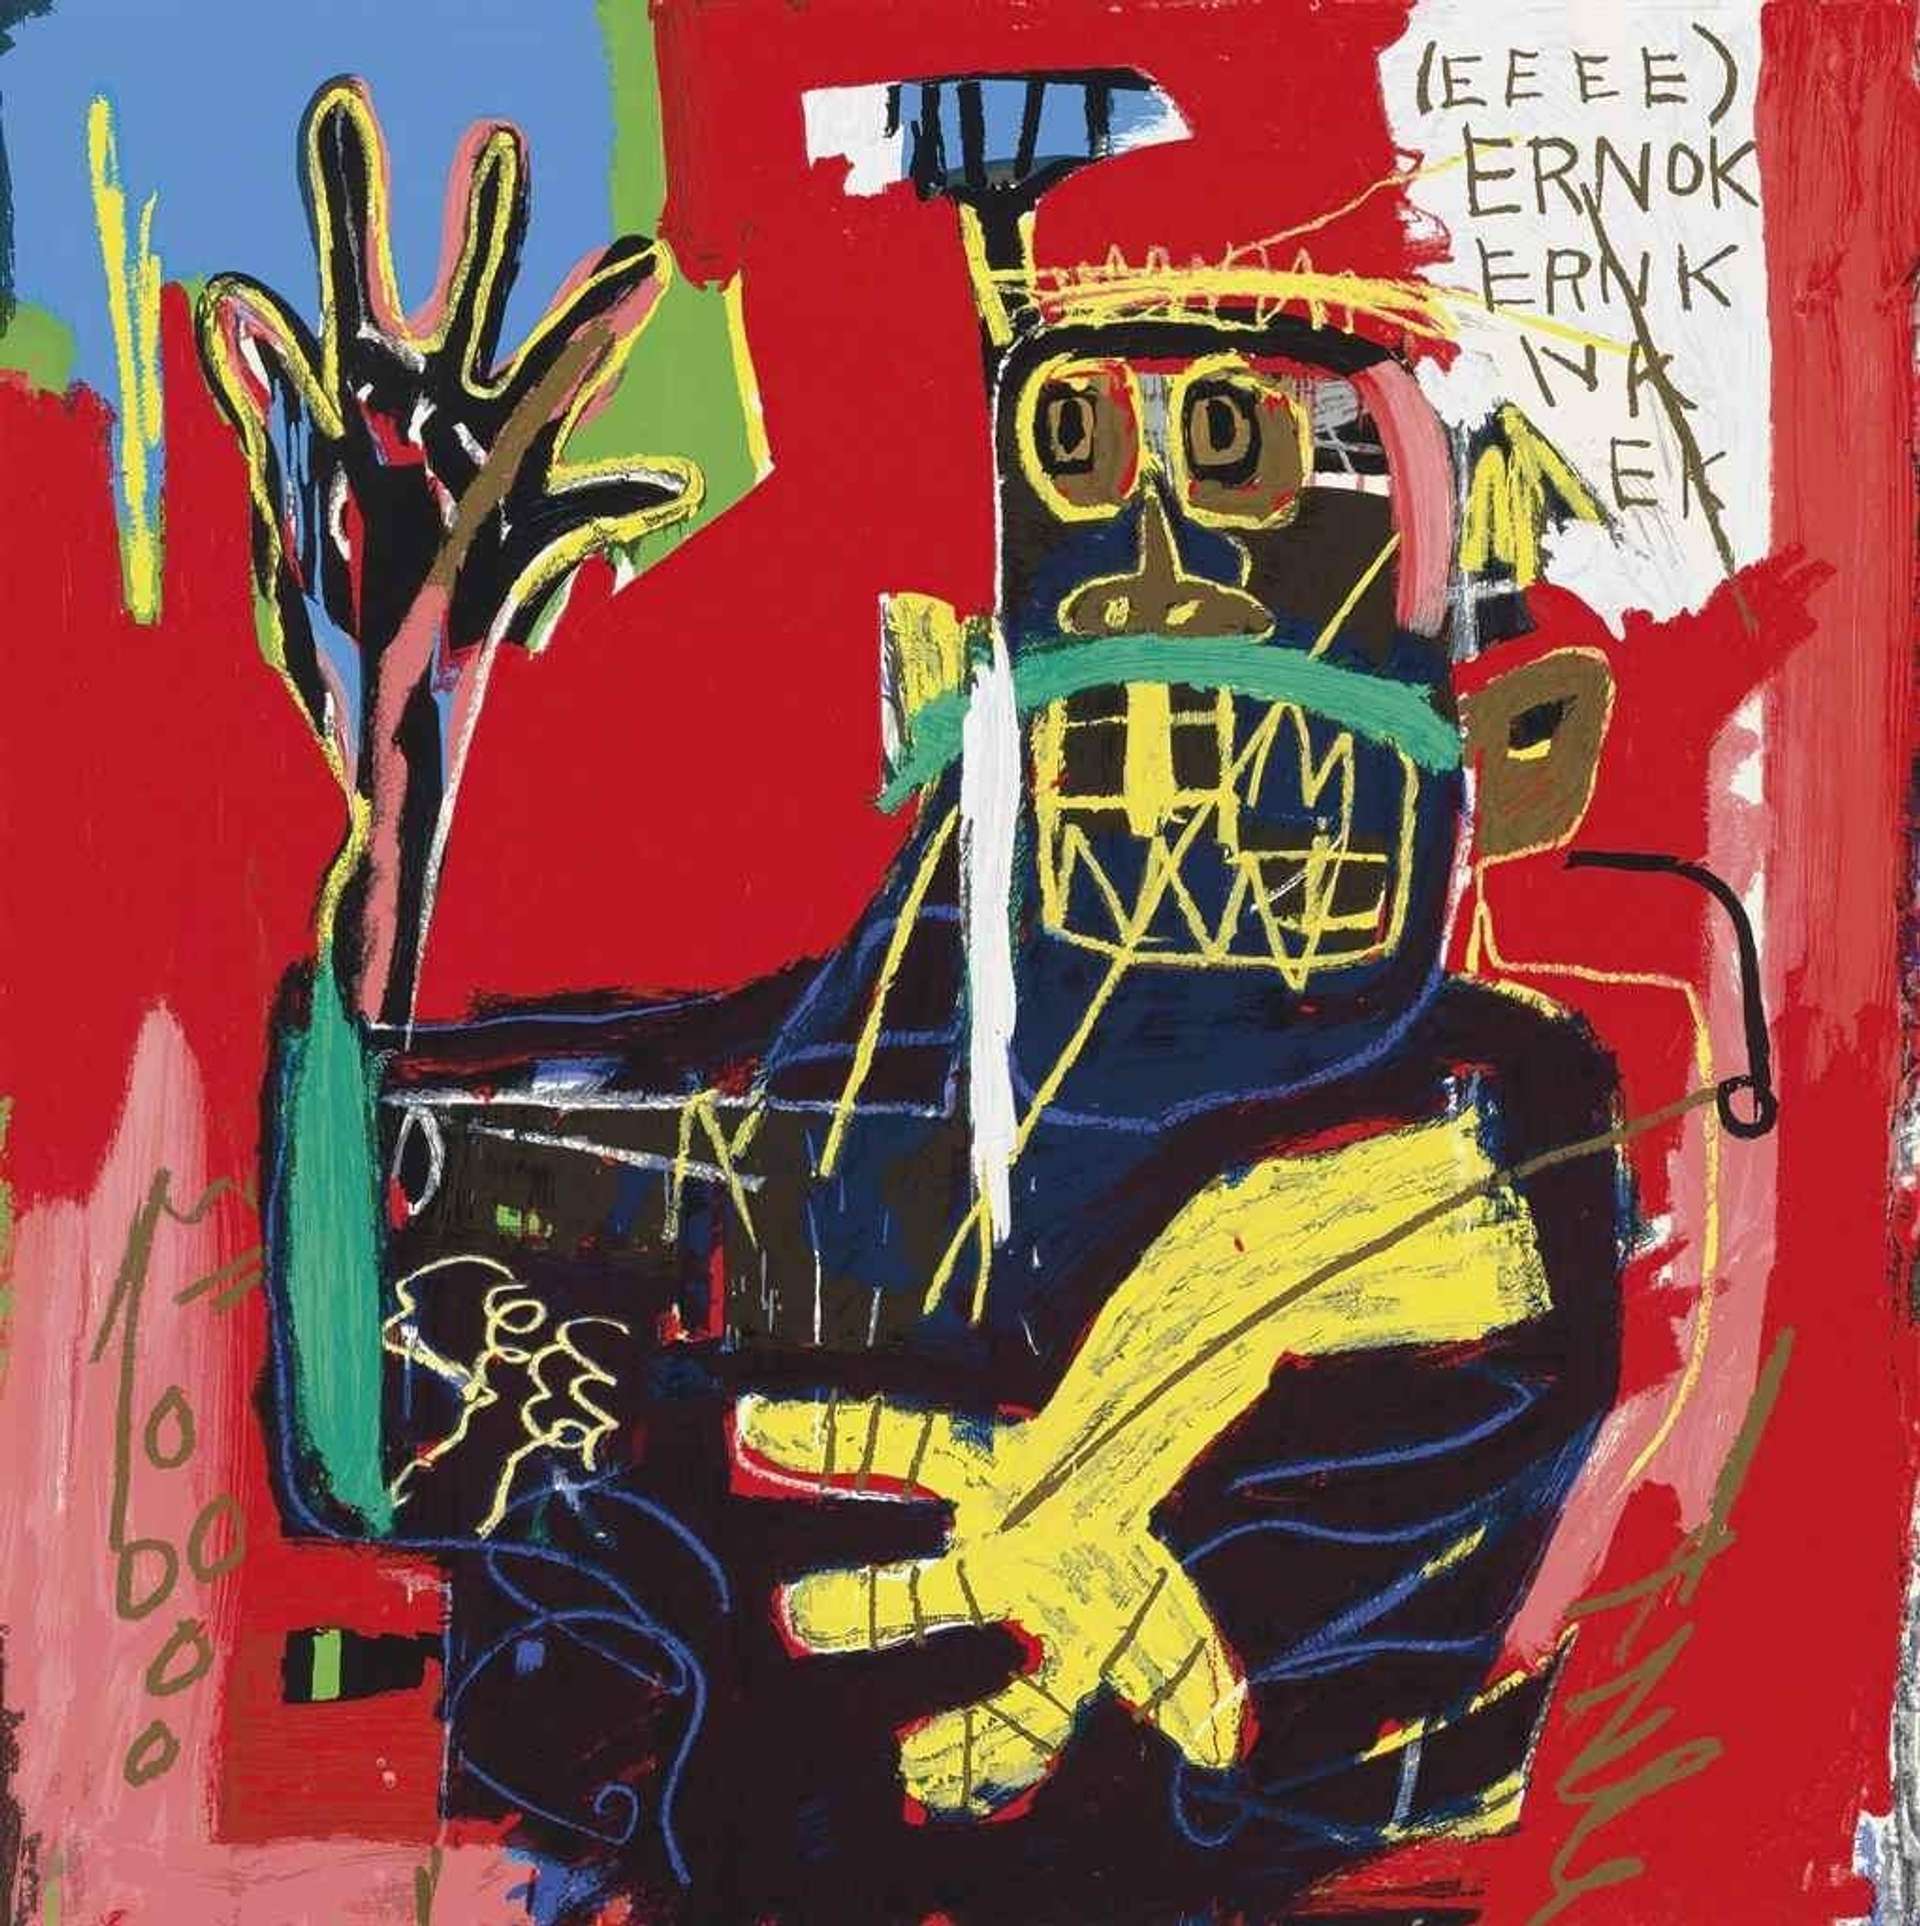 Jean-Michel Basquiat’s Ernok. A Neo-Expressionist screen print of an abstract figure with his hands extended outward against a red background. ​​